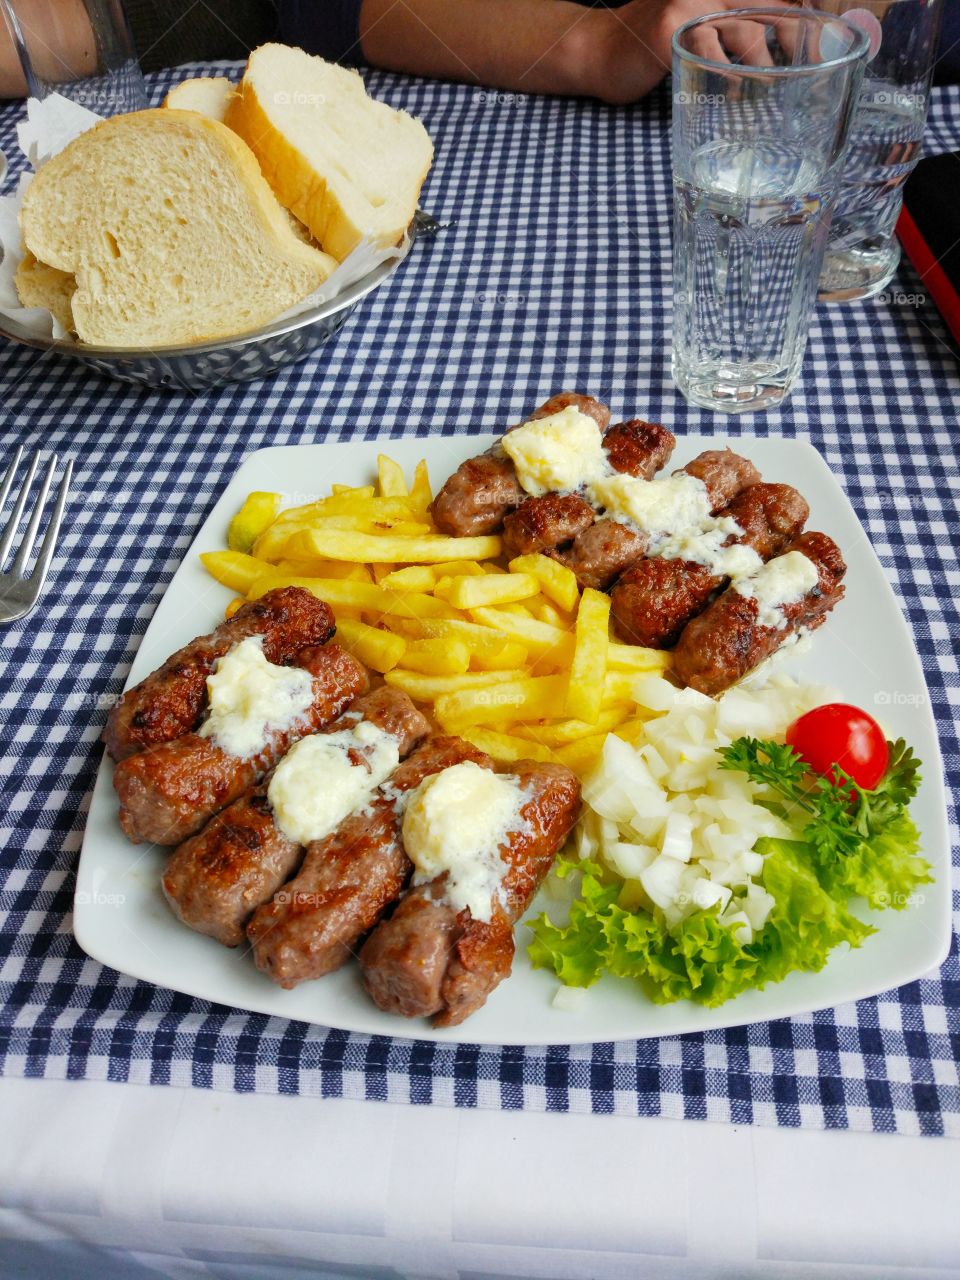 Kebab with french fries, lettuce and onion